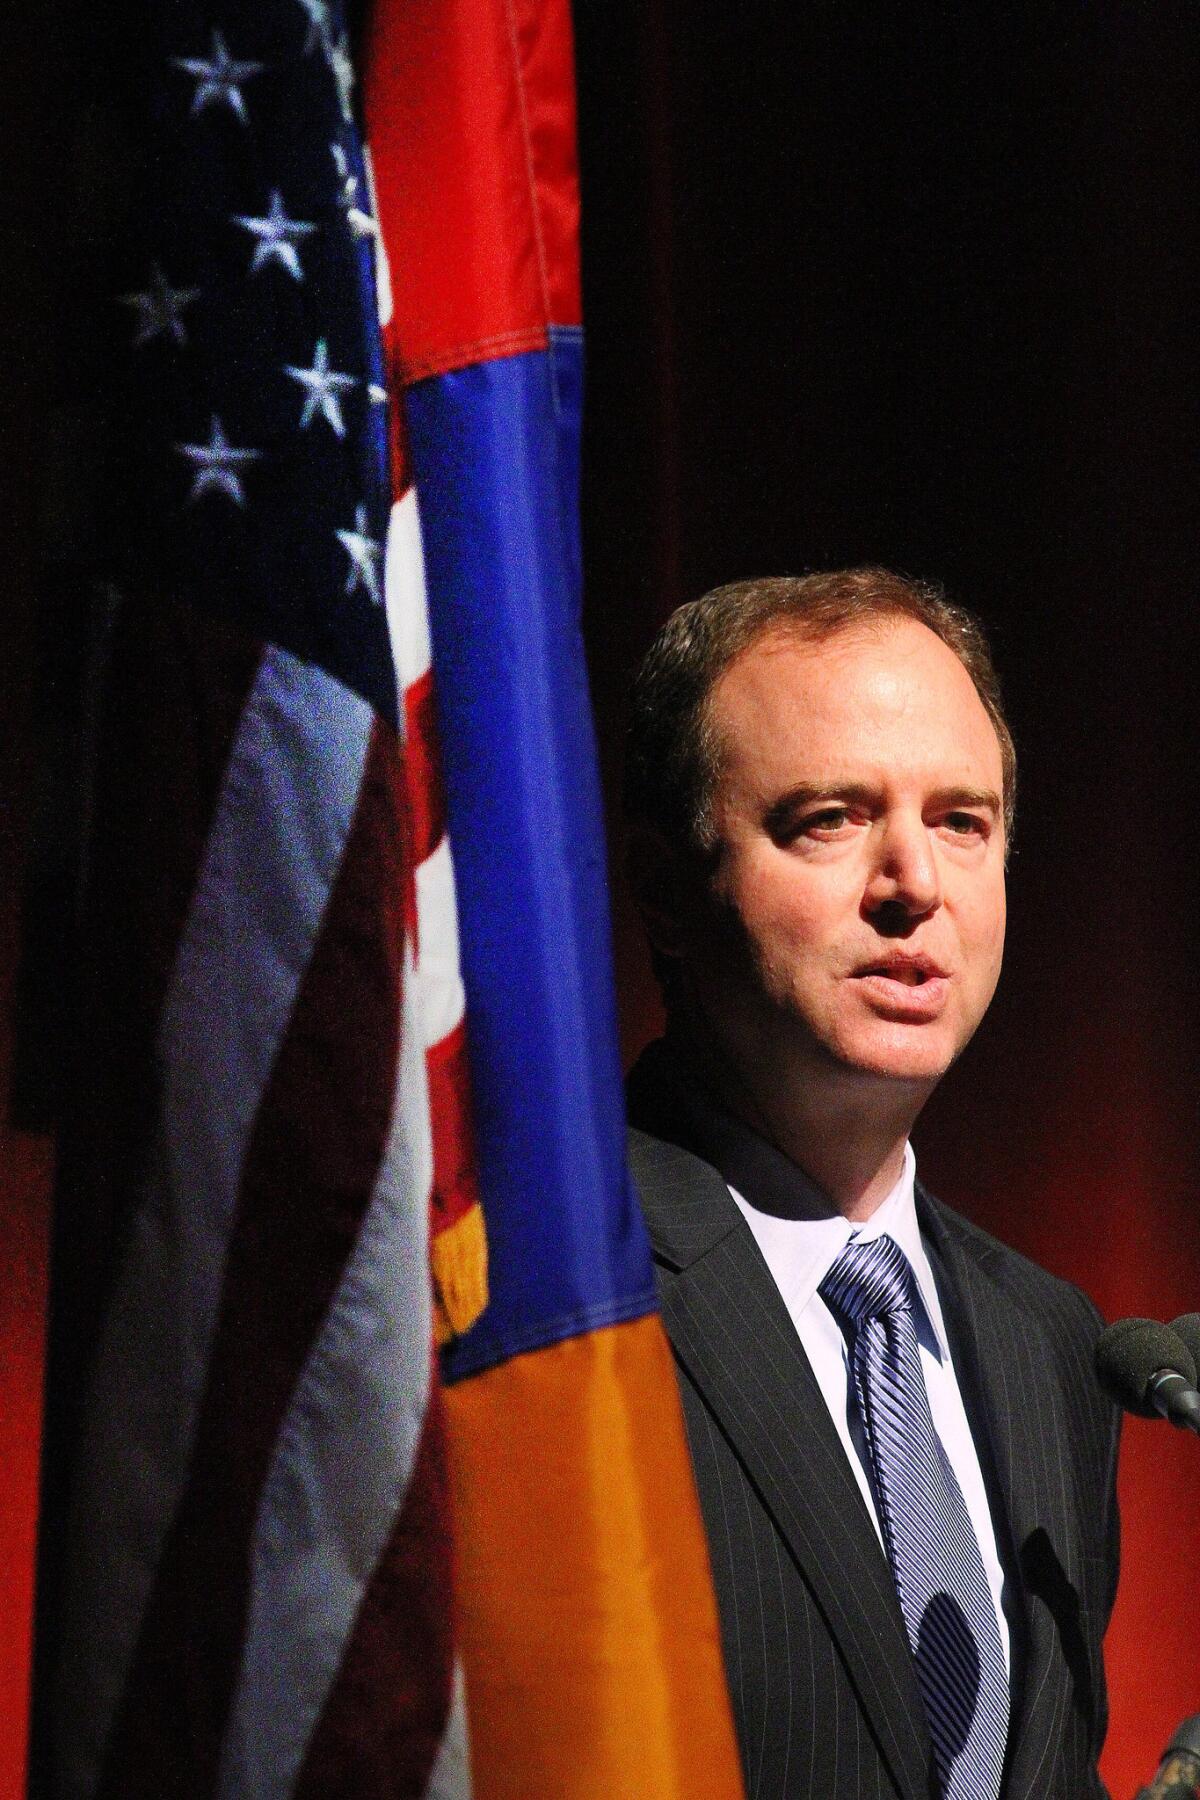 Rep. Adam Schiff (D-Burbank) reads a letter he wrote to the the Turkish people at the city of Glendale's 13th Annual Commemoration of the Armenian Genocide at the Alex Theatre in Glendale on Thursday, April 24, 2014. Schiff said Thursday that he is seriously considering running for the U.S. Senate seat currently held by Barbara Boxer, who announced she will retire after her term ends in 2016.